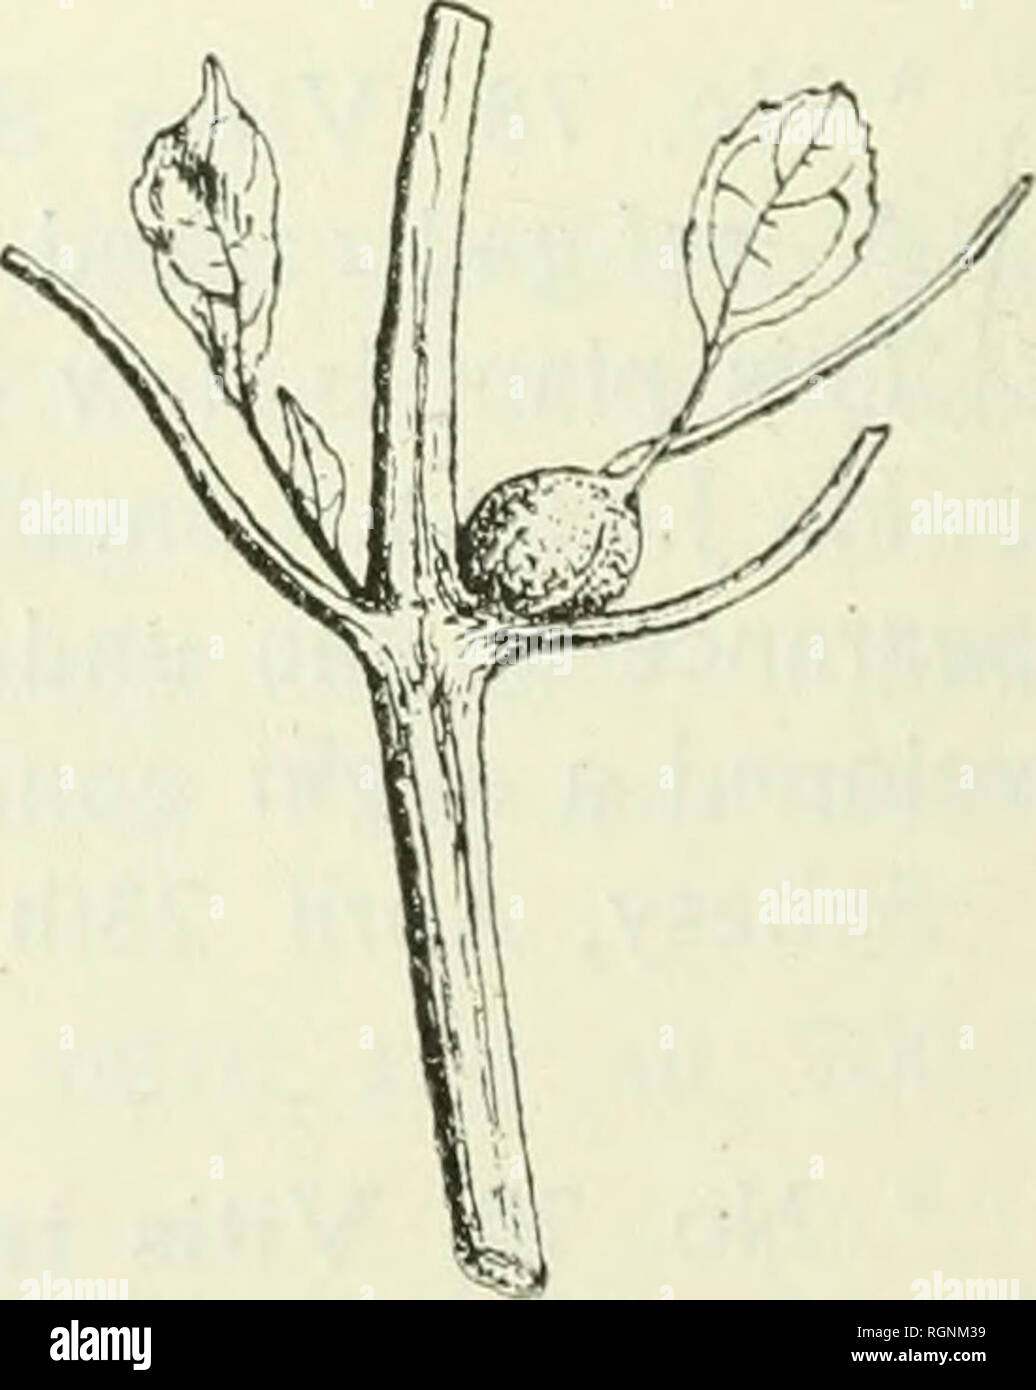 . Bulletin du Jardin botanique de Buitenzorg. Plants -- Indonesia; Plants. Fig. 19. A midgc-gall on Vitis trifolia L. X 1. shoots. The internodes remain shorter and the leaves remain smaller and accumulated. See the figure 19. Sebesy, in a marsh, April 24th IQ21. No. 5207. No. 80. Wcdelia biflora D. C. A leaf-gall formed by a gali- mite. Common on the beach of tropical countries. Small excres- cences among the ramifications of the veins; and already described from Krakatau. Krakatau, Apri! 24th 1919. No. 3543. Verlaten-island, April 22nd 1920. No. 4029. Sebesy, April 27th 1921. No. 5336. Liter Stock Photo